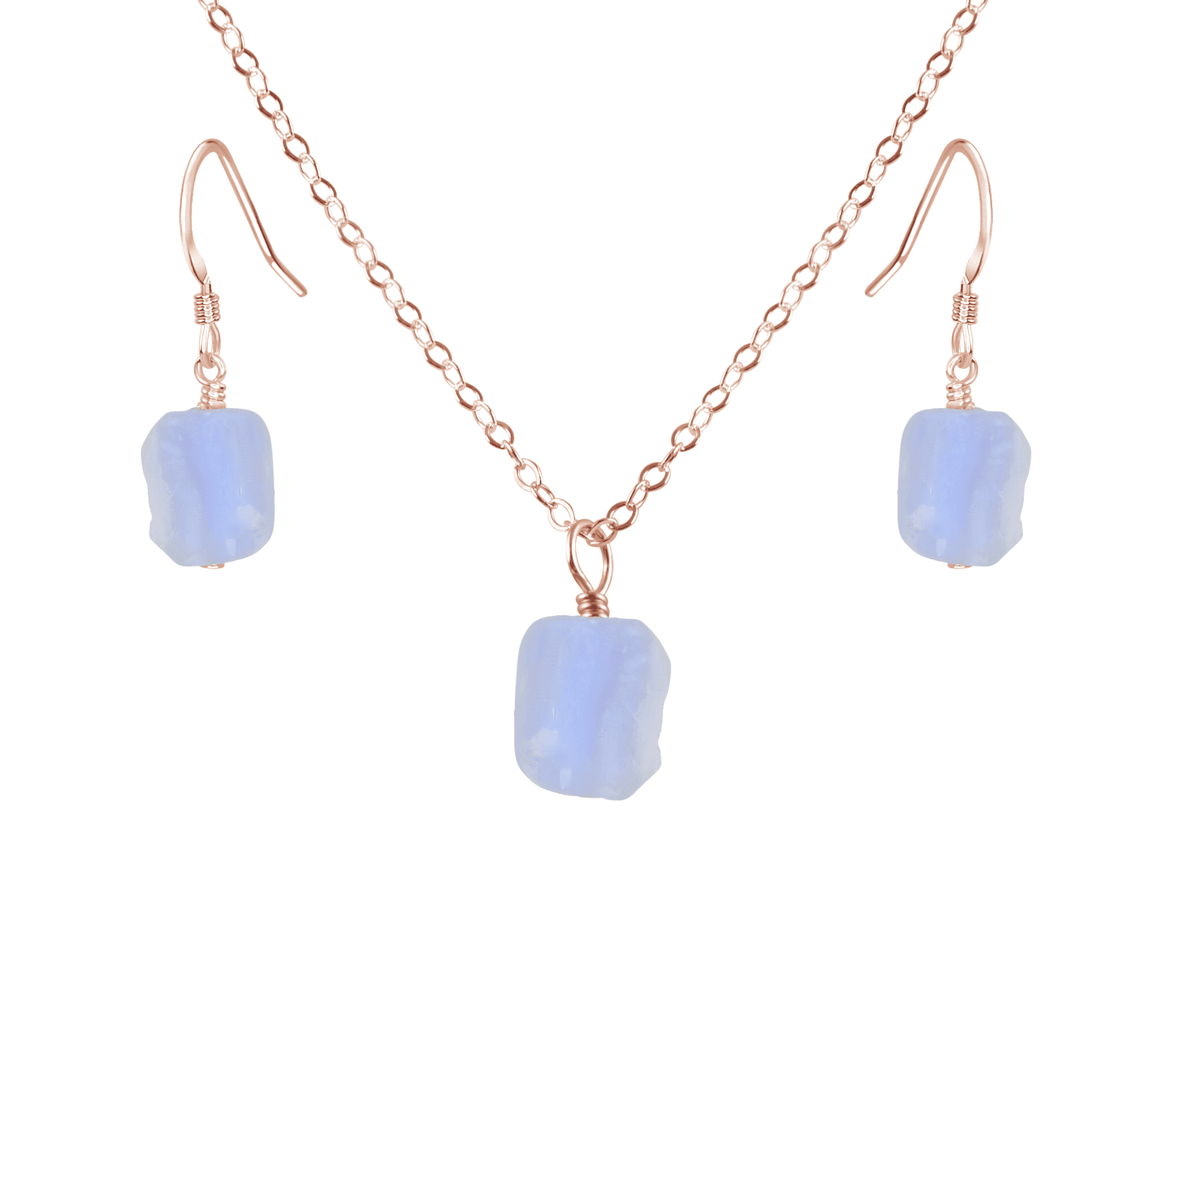 Raw Blue Lace Agate Crystal Earrings & Necklace Set - Raw Blue Lace Agate Crystal Earrings & Necklace Set - 14k Rose Gold Fill - Luna Tide Handmade Crystal Jewellery